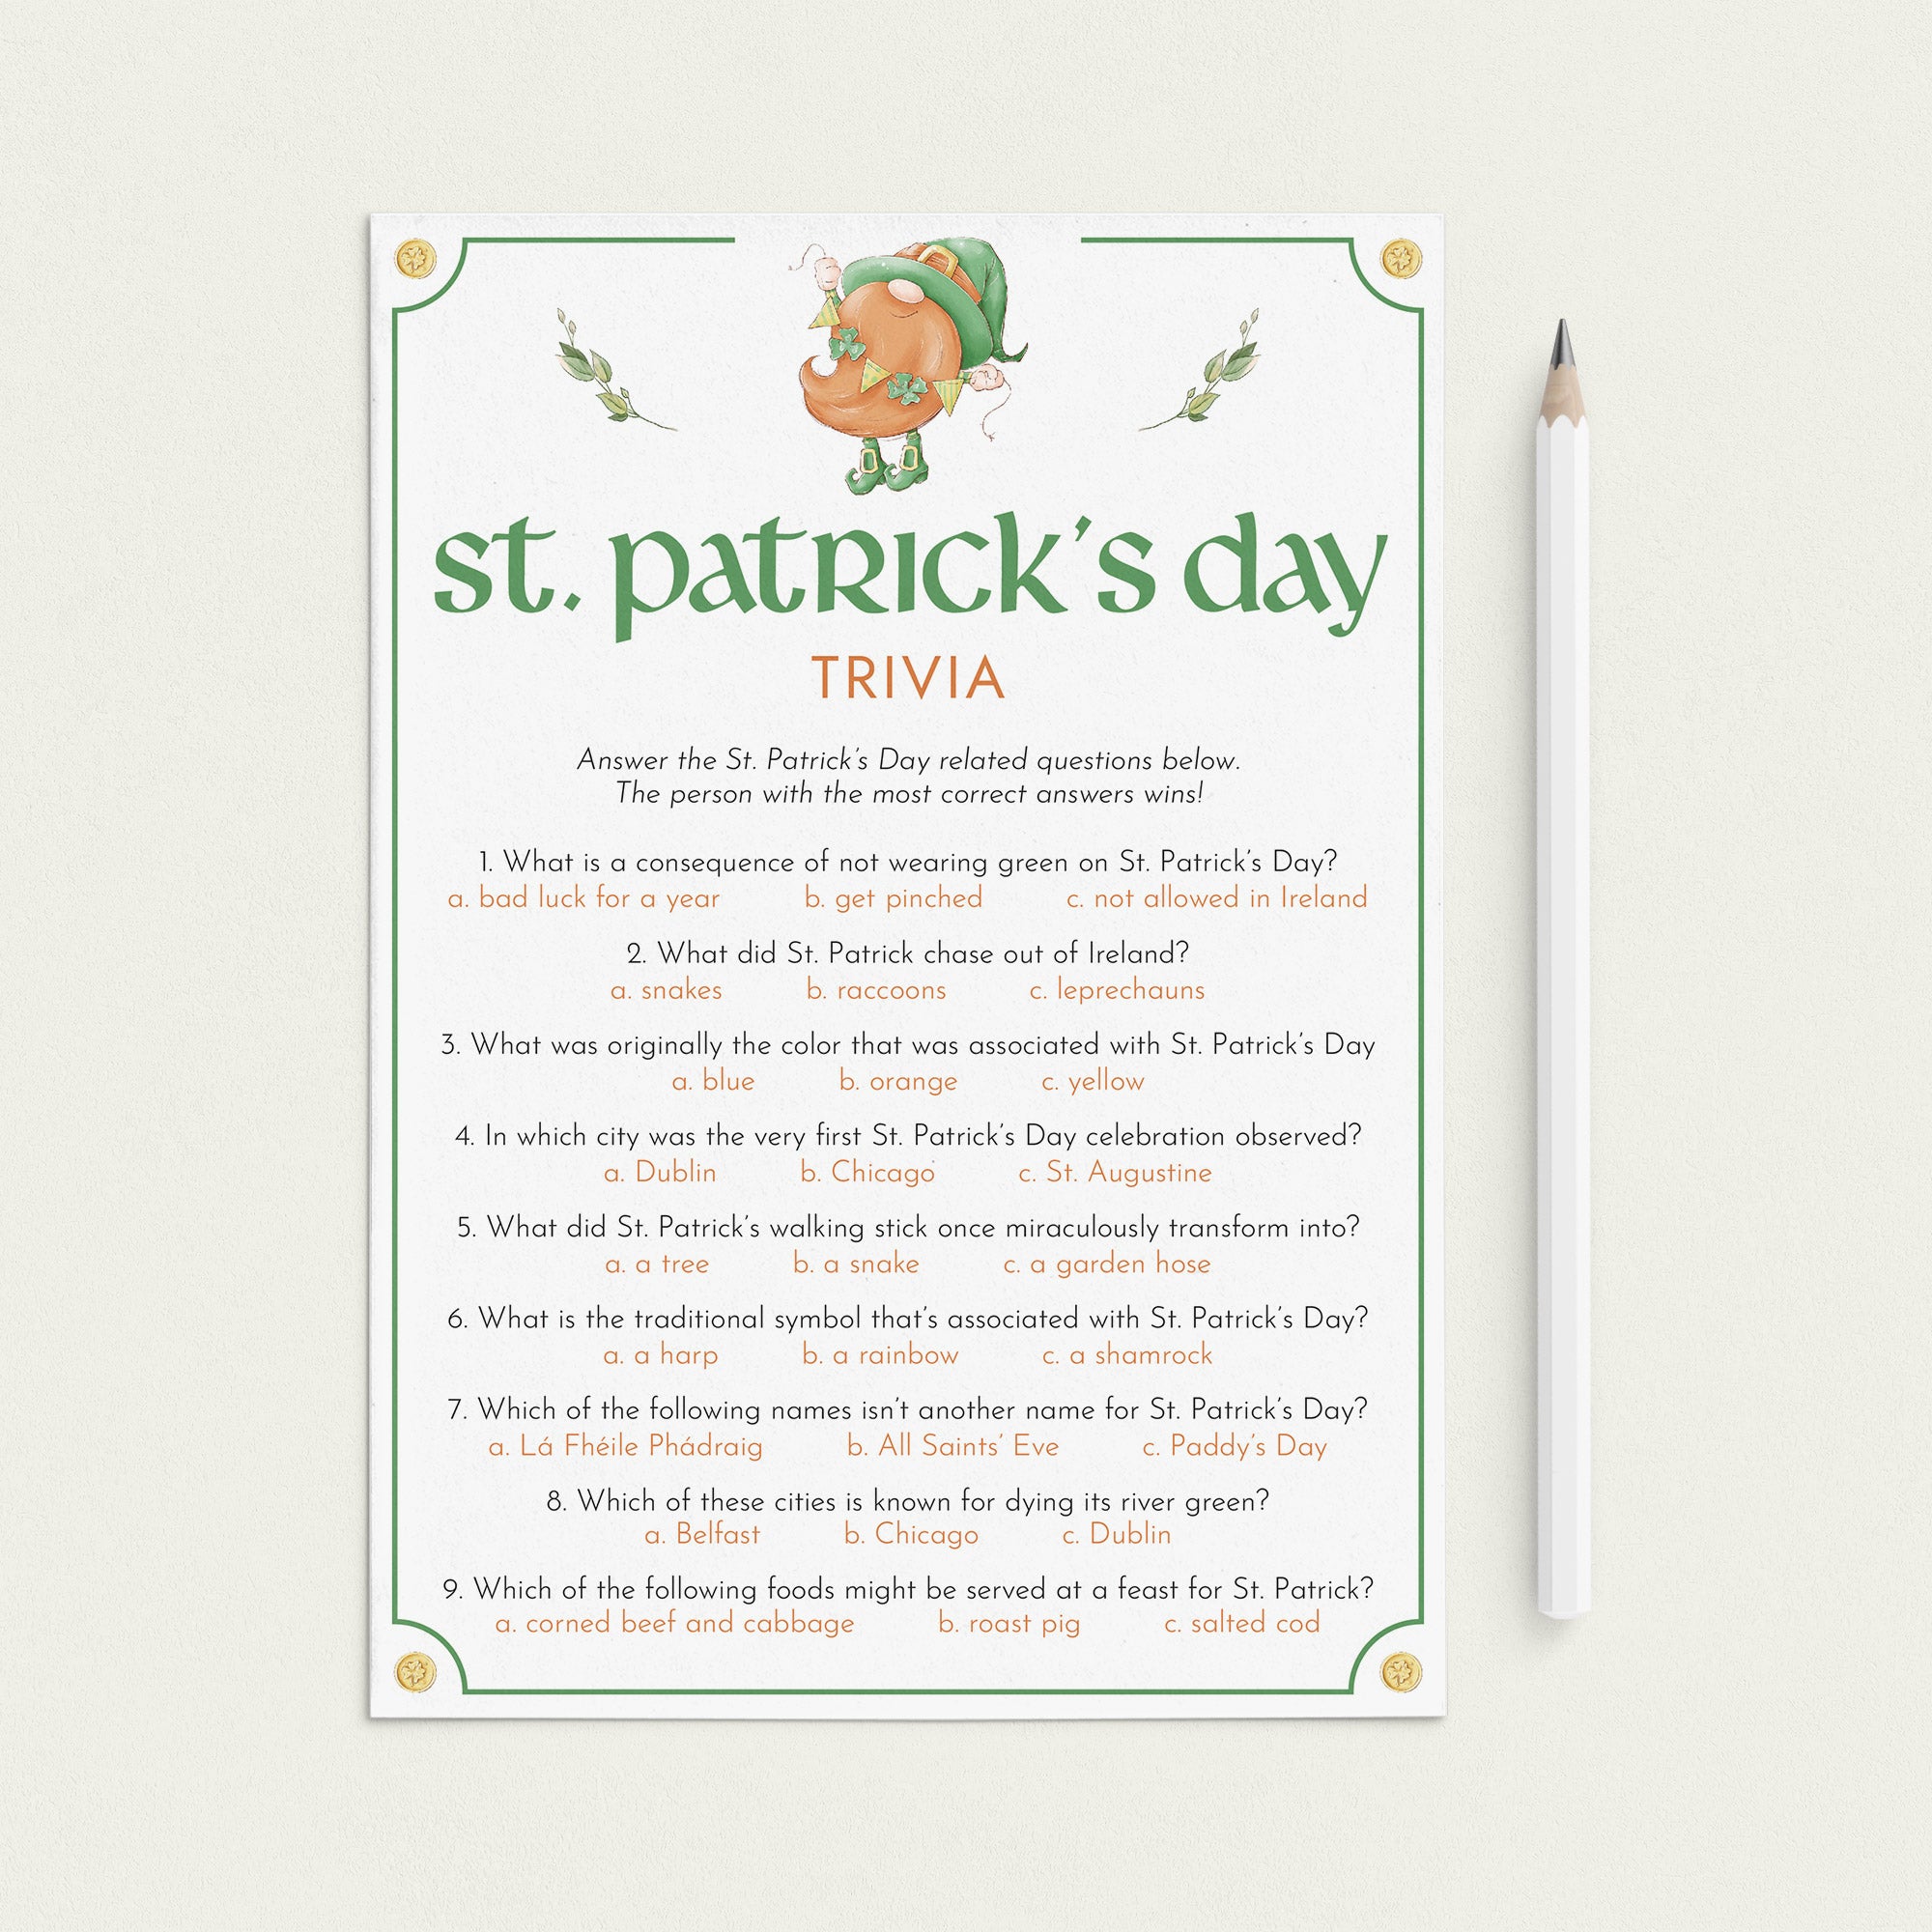 St Patrick's Day Trivia Questions and Answers Printable by LittleSizzle